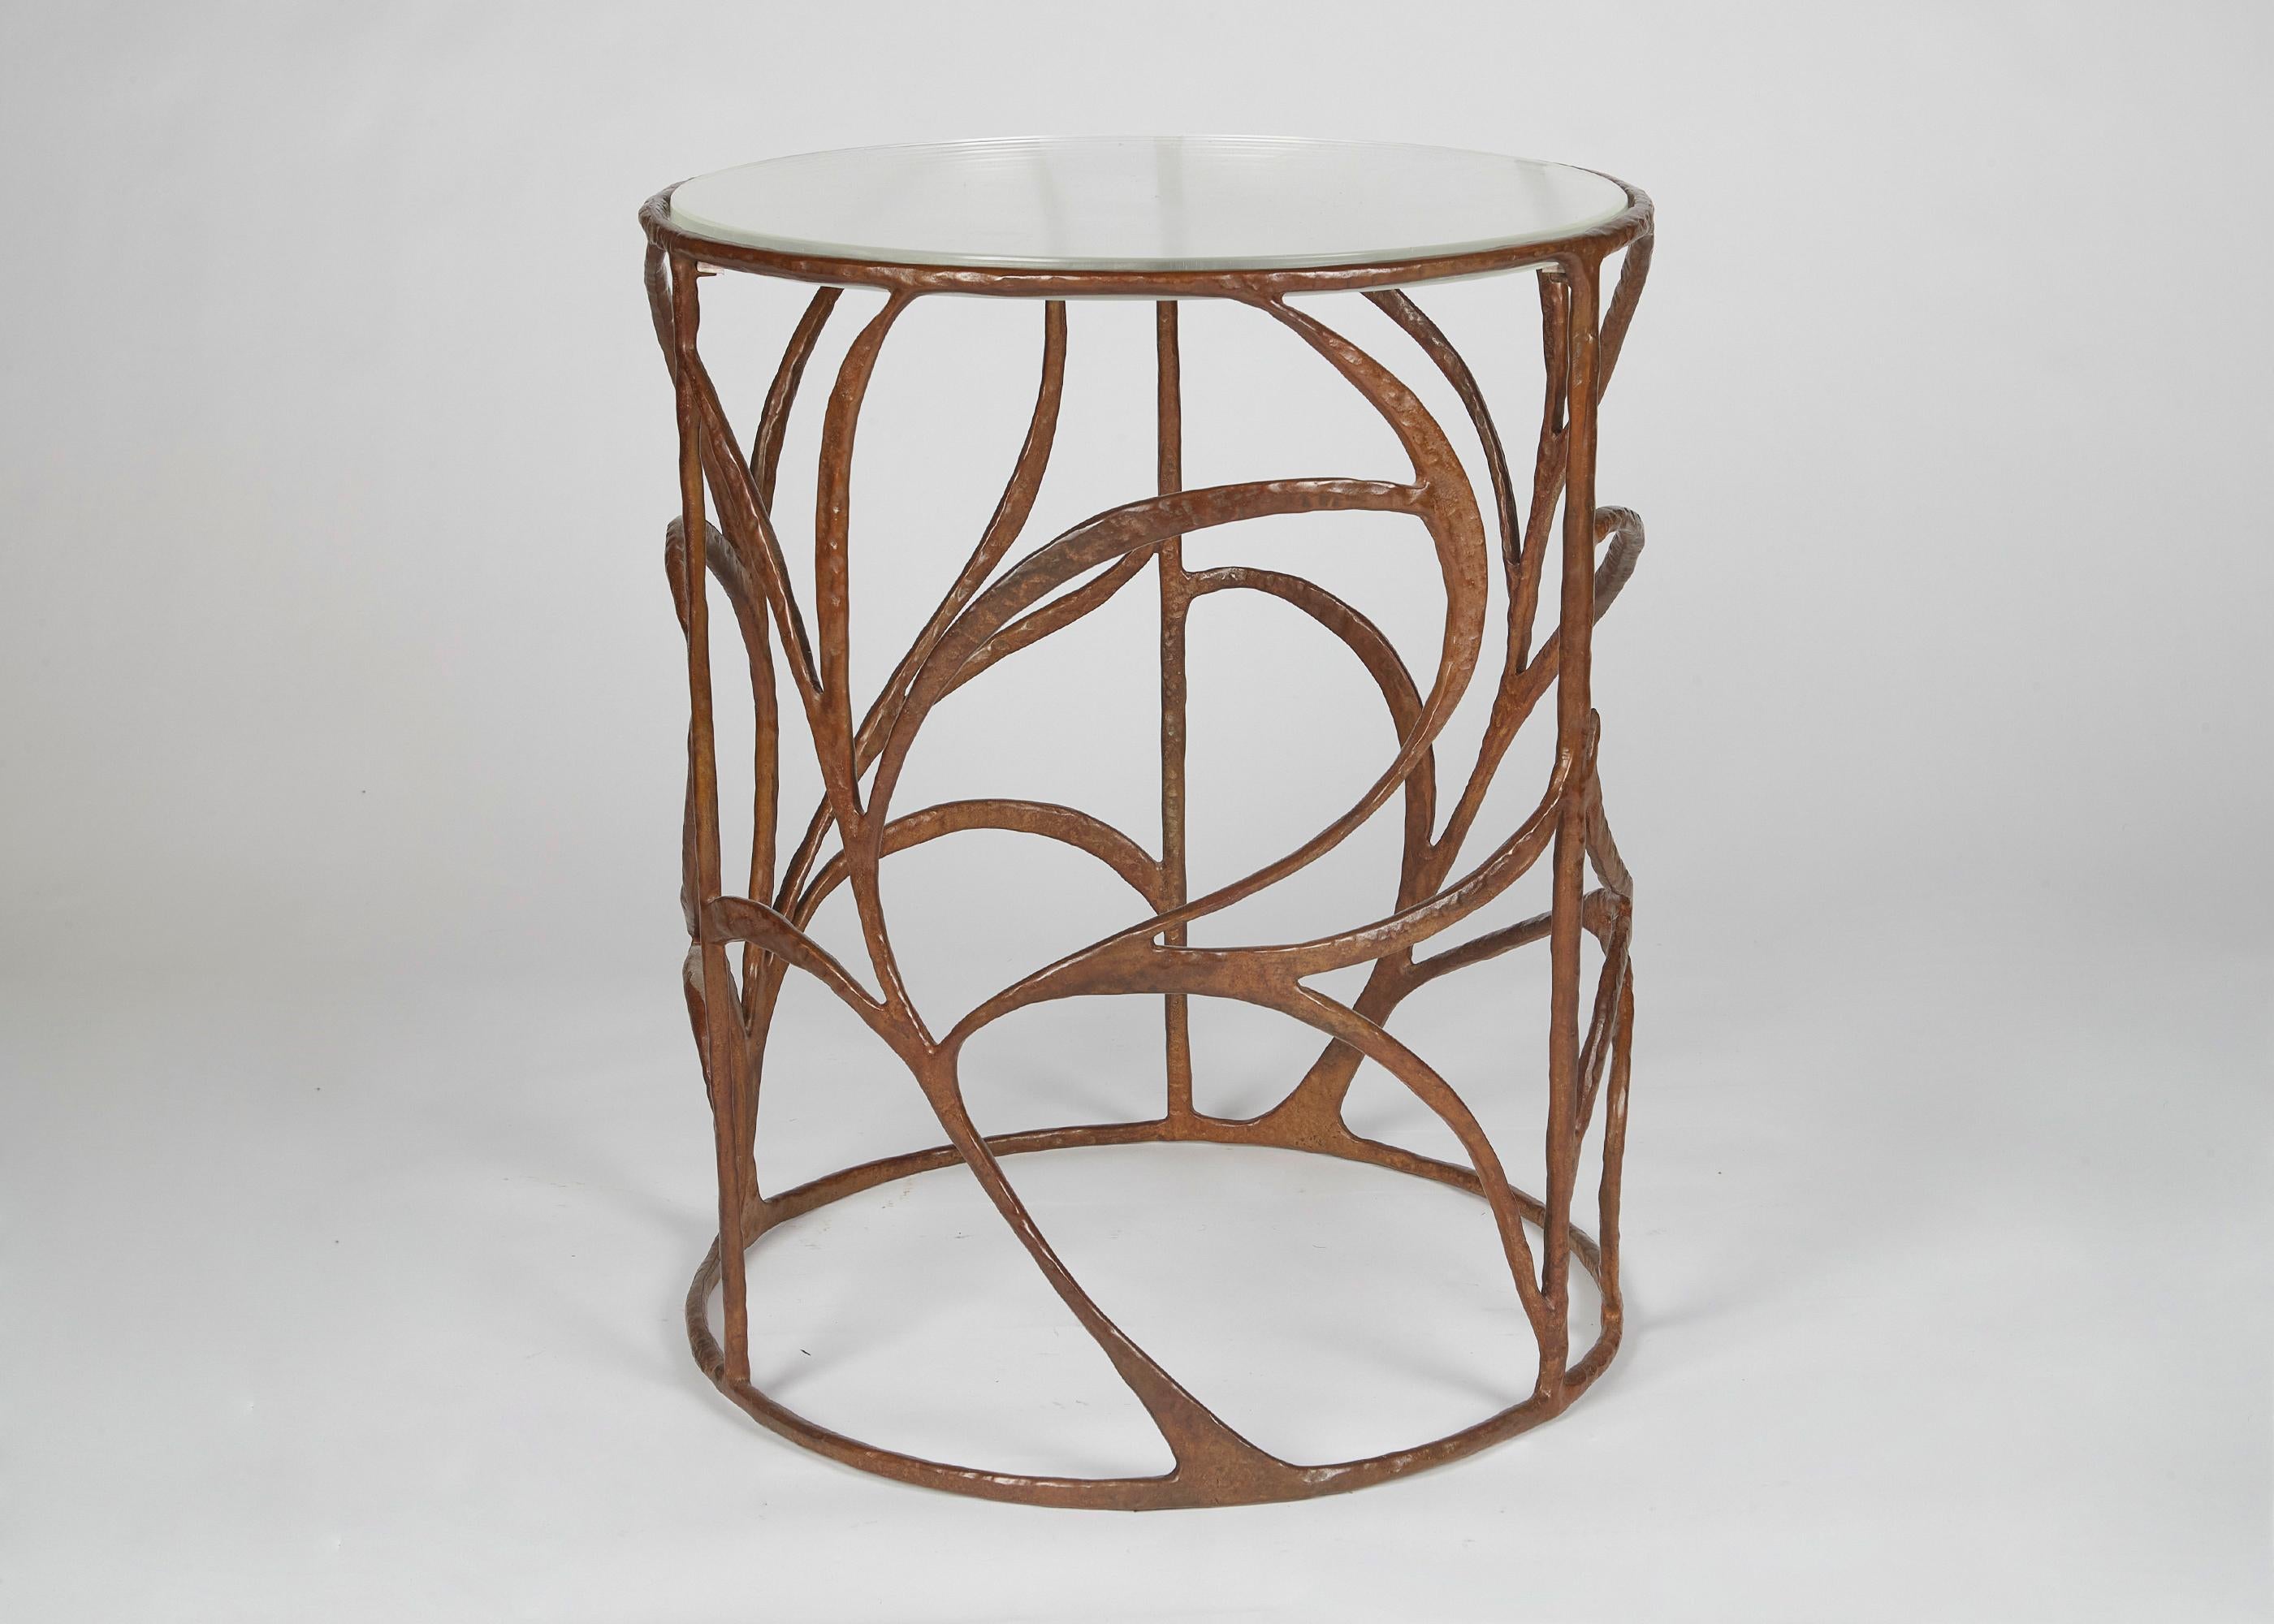 Franck Evennou has a poetic language inspired by nature, and by all subjects that carry the residue of their pasts. His works, particularly in bronze, like this elegant side table, possess a powerful nostalgic quality, capturing in sculptural